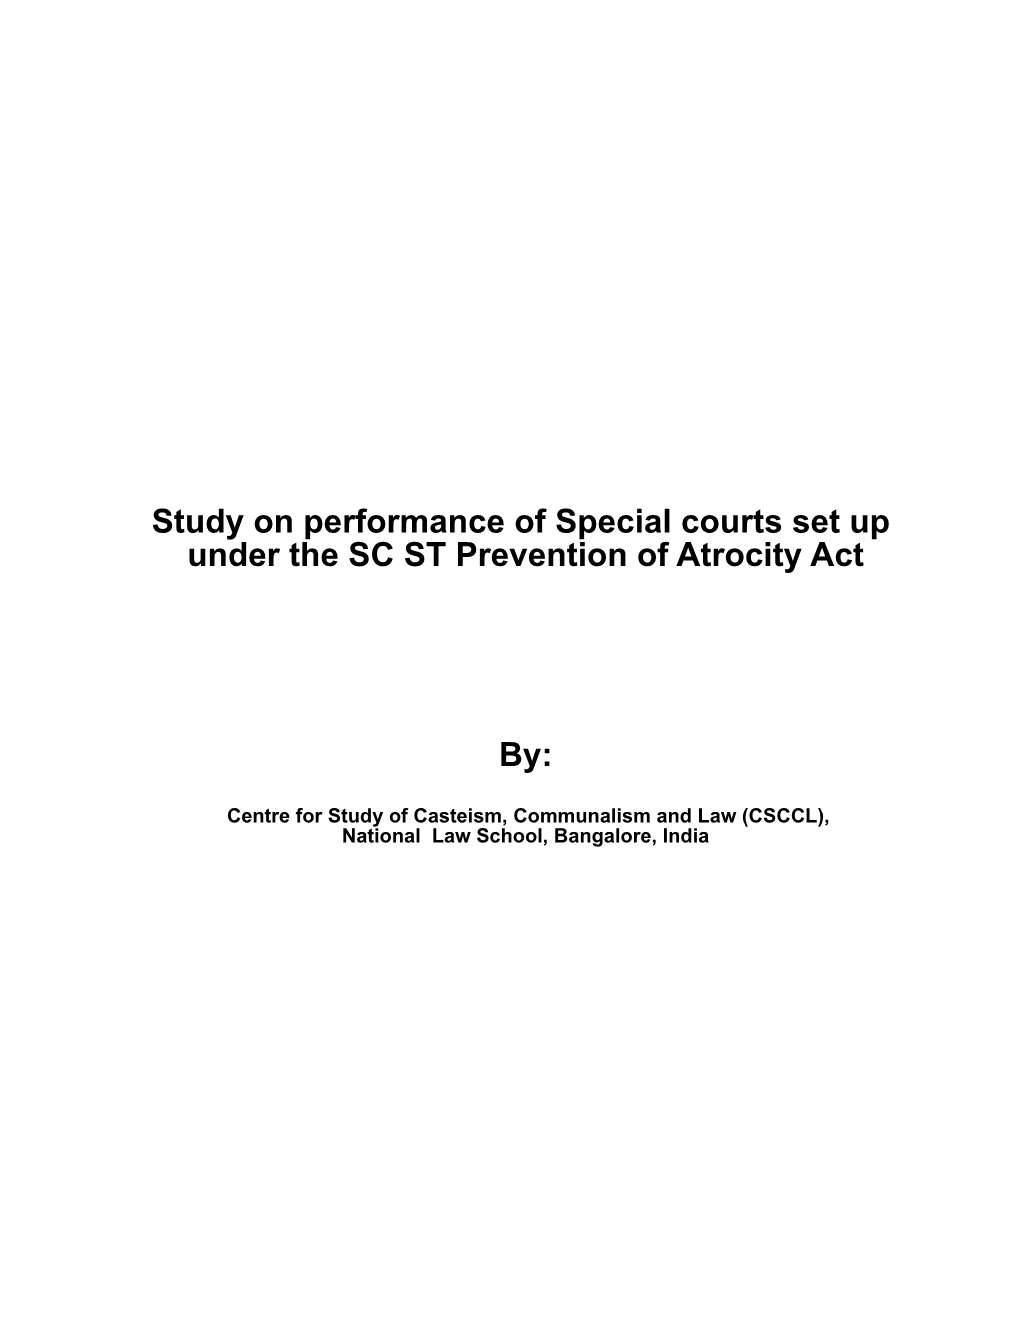 Study on Performance of Special Courts Set up Under the SC ST Prevention of Atrocity Act